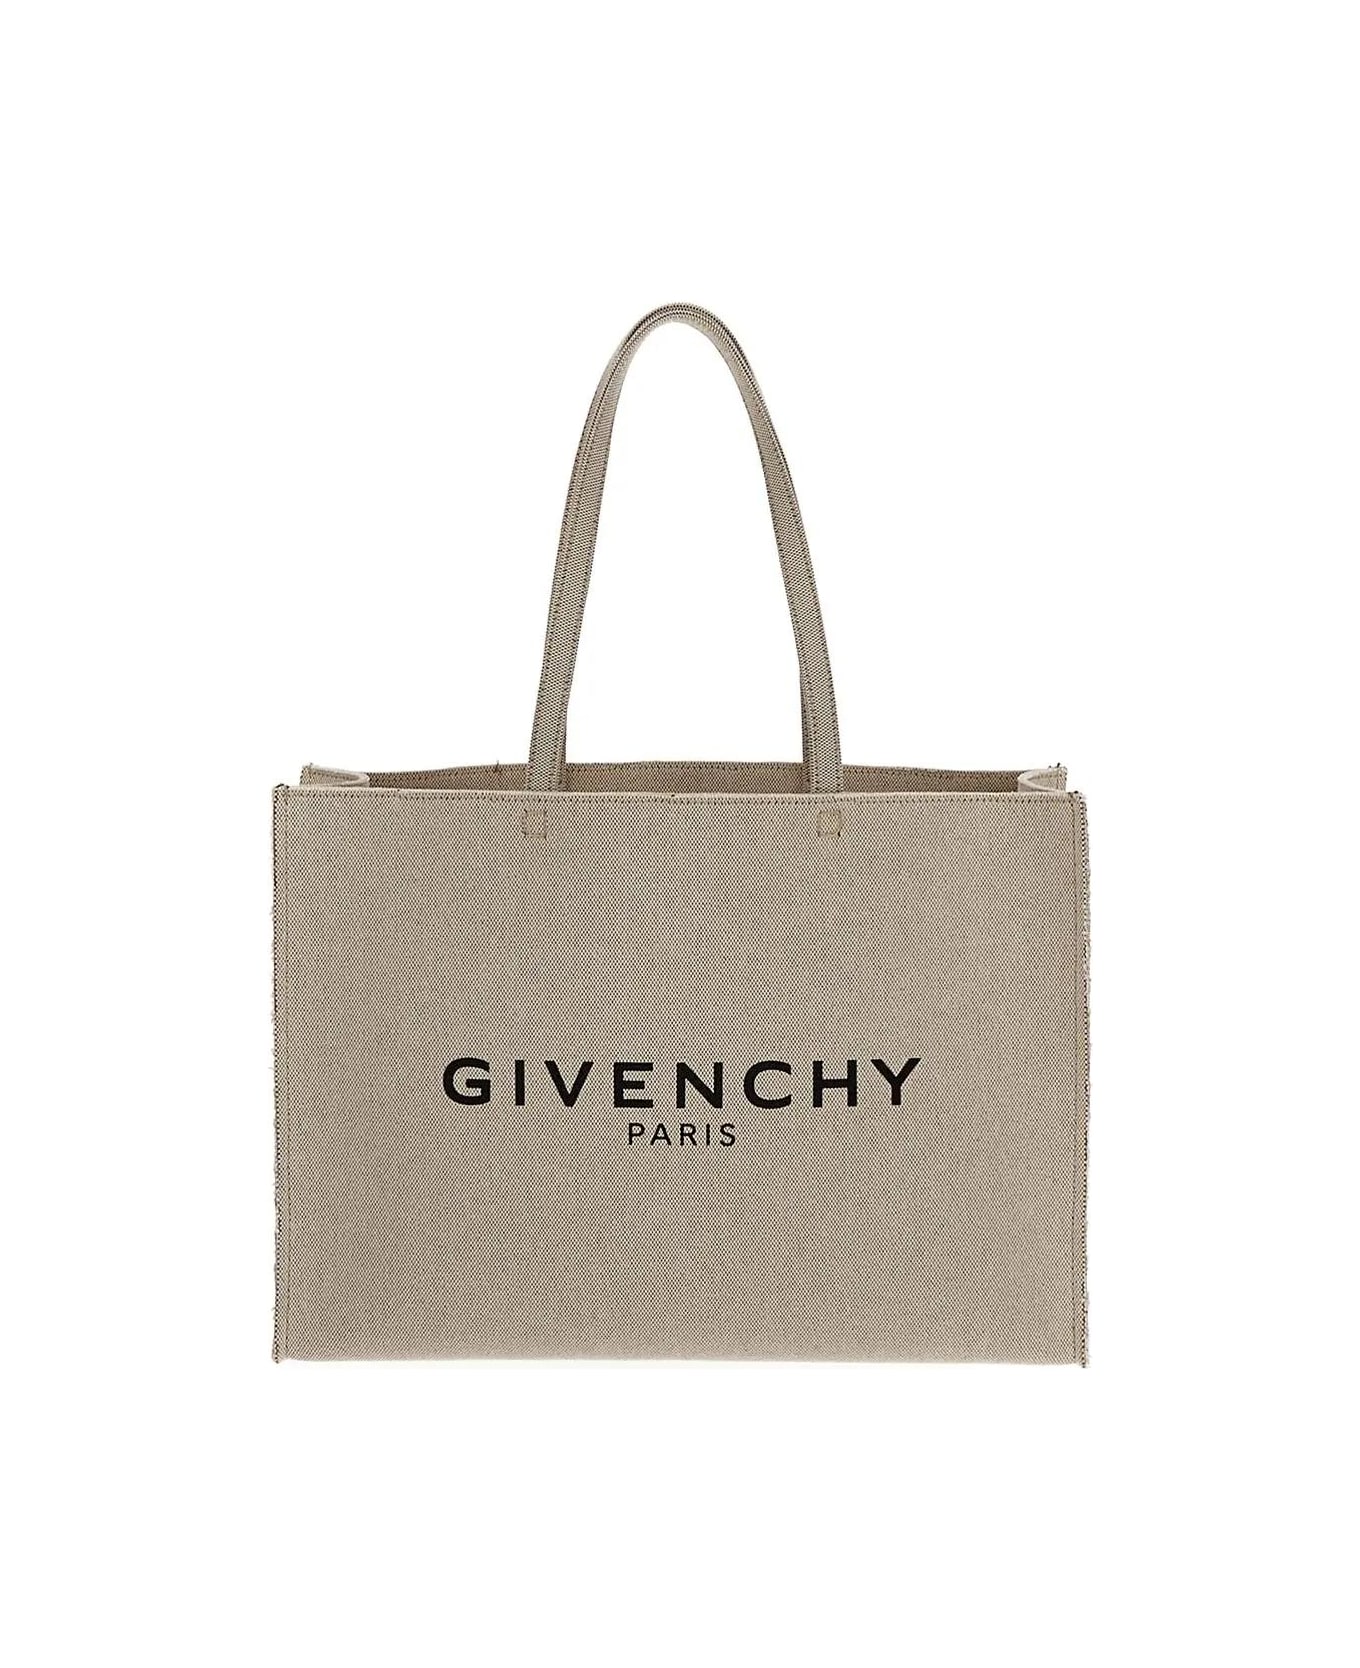 Givenchy Large G Tote Shopping Bag - Beige